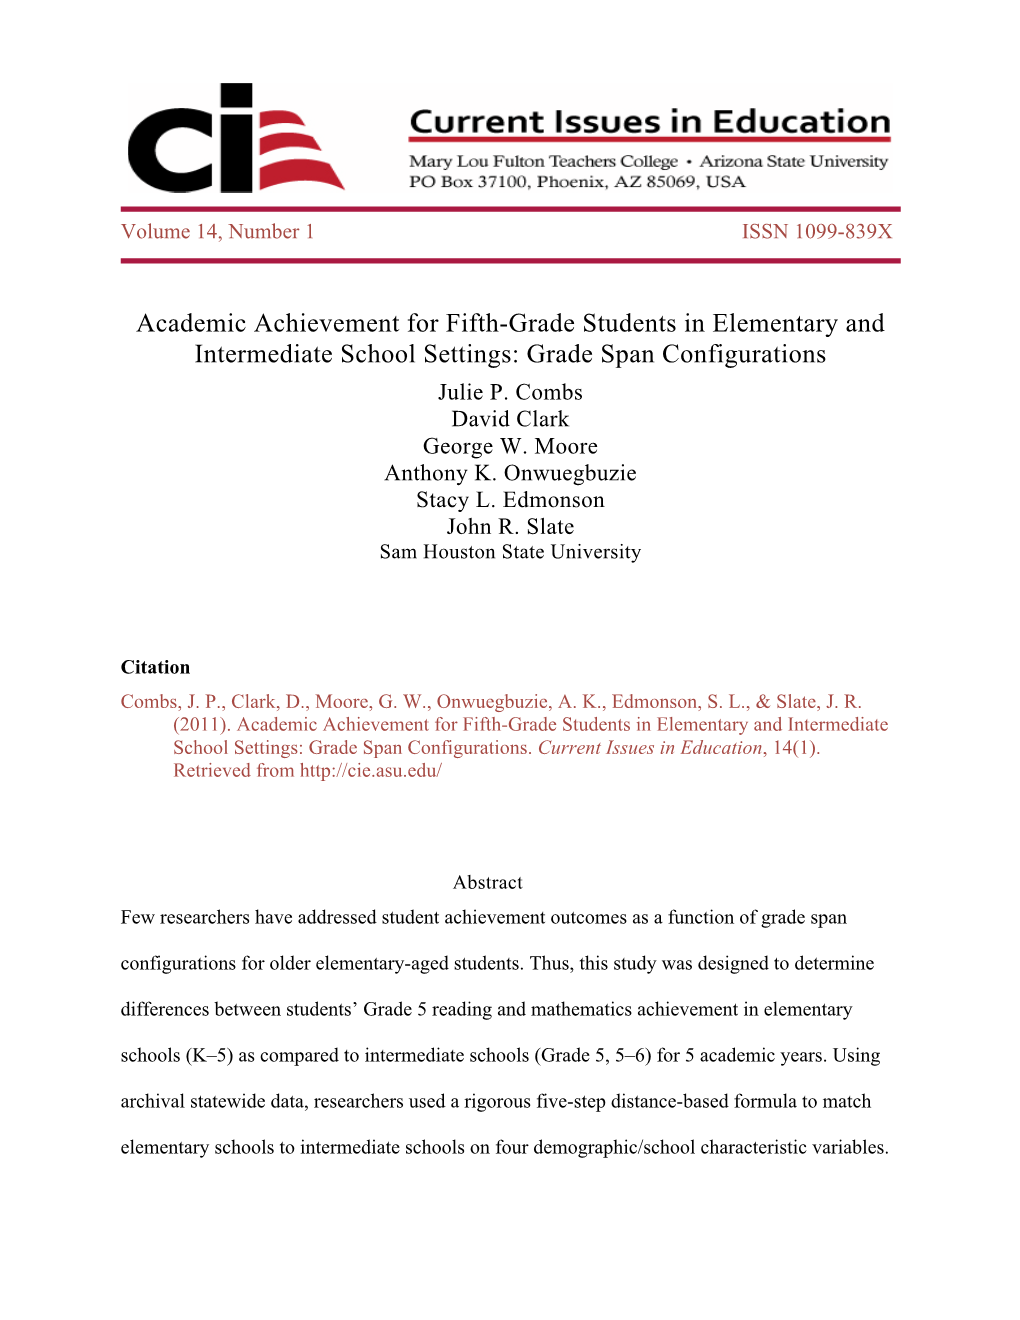 Academic Achievement for Fifth-Grade Students in Elementary and Intermediate School Settings: Grade Span Configurations Julie P